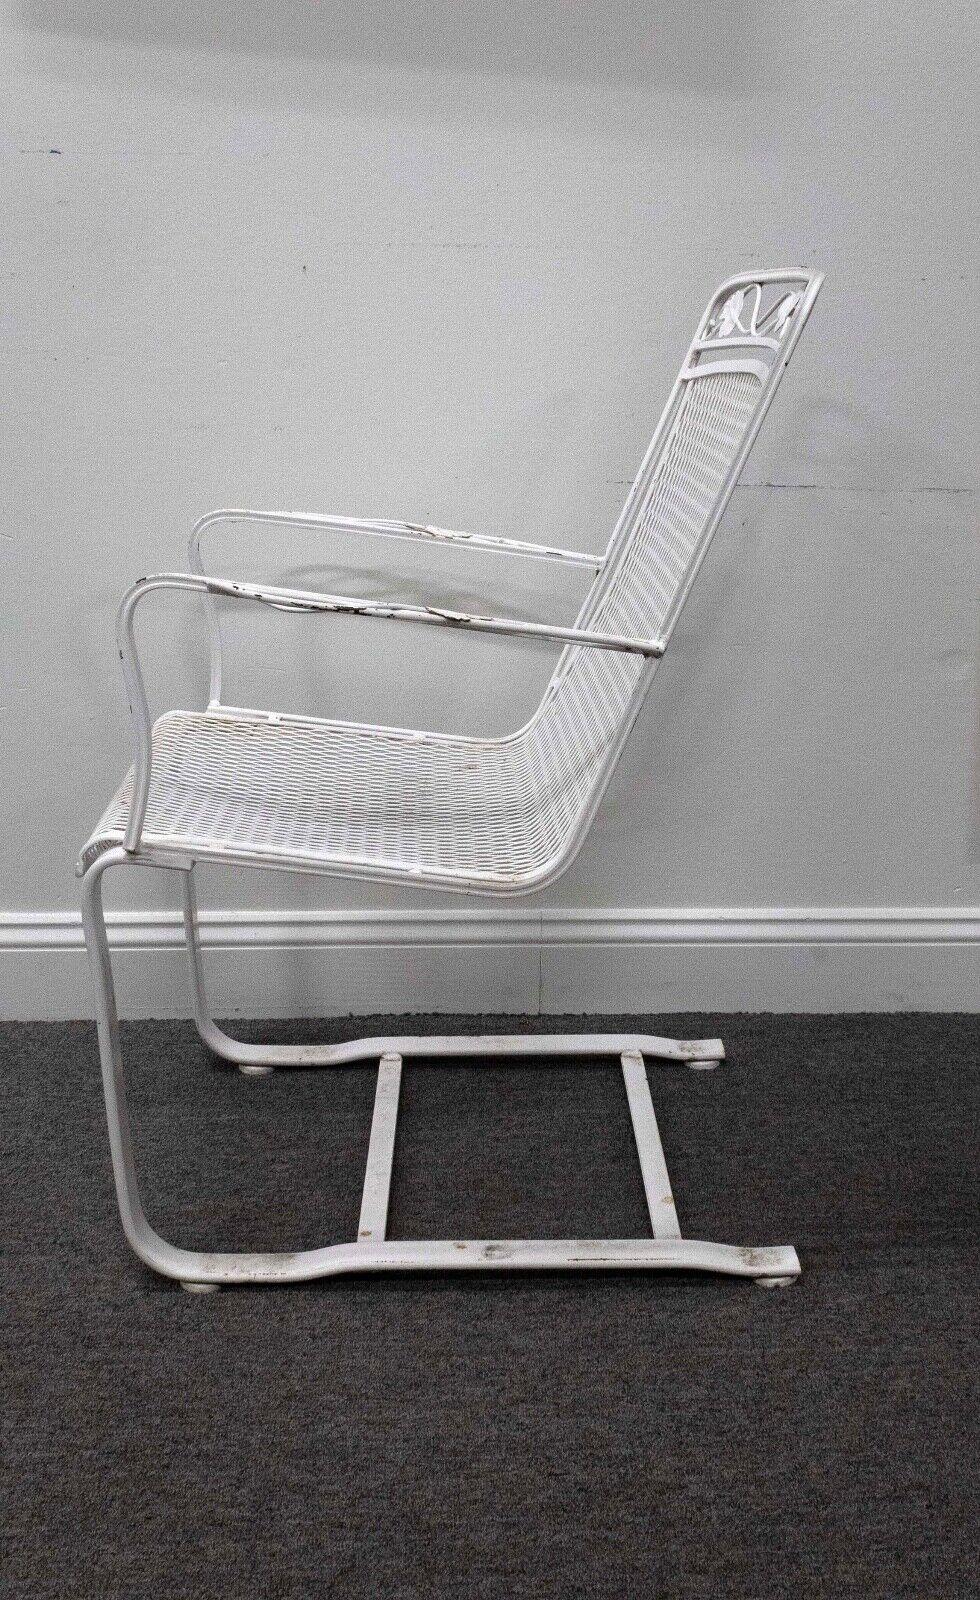 Pair of Vintage Woodard Wrought Iron Flex Rocking Chairs Mid Century Modern In Good Condition For Sale In Keego Harbor, MI